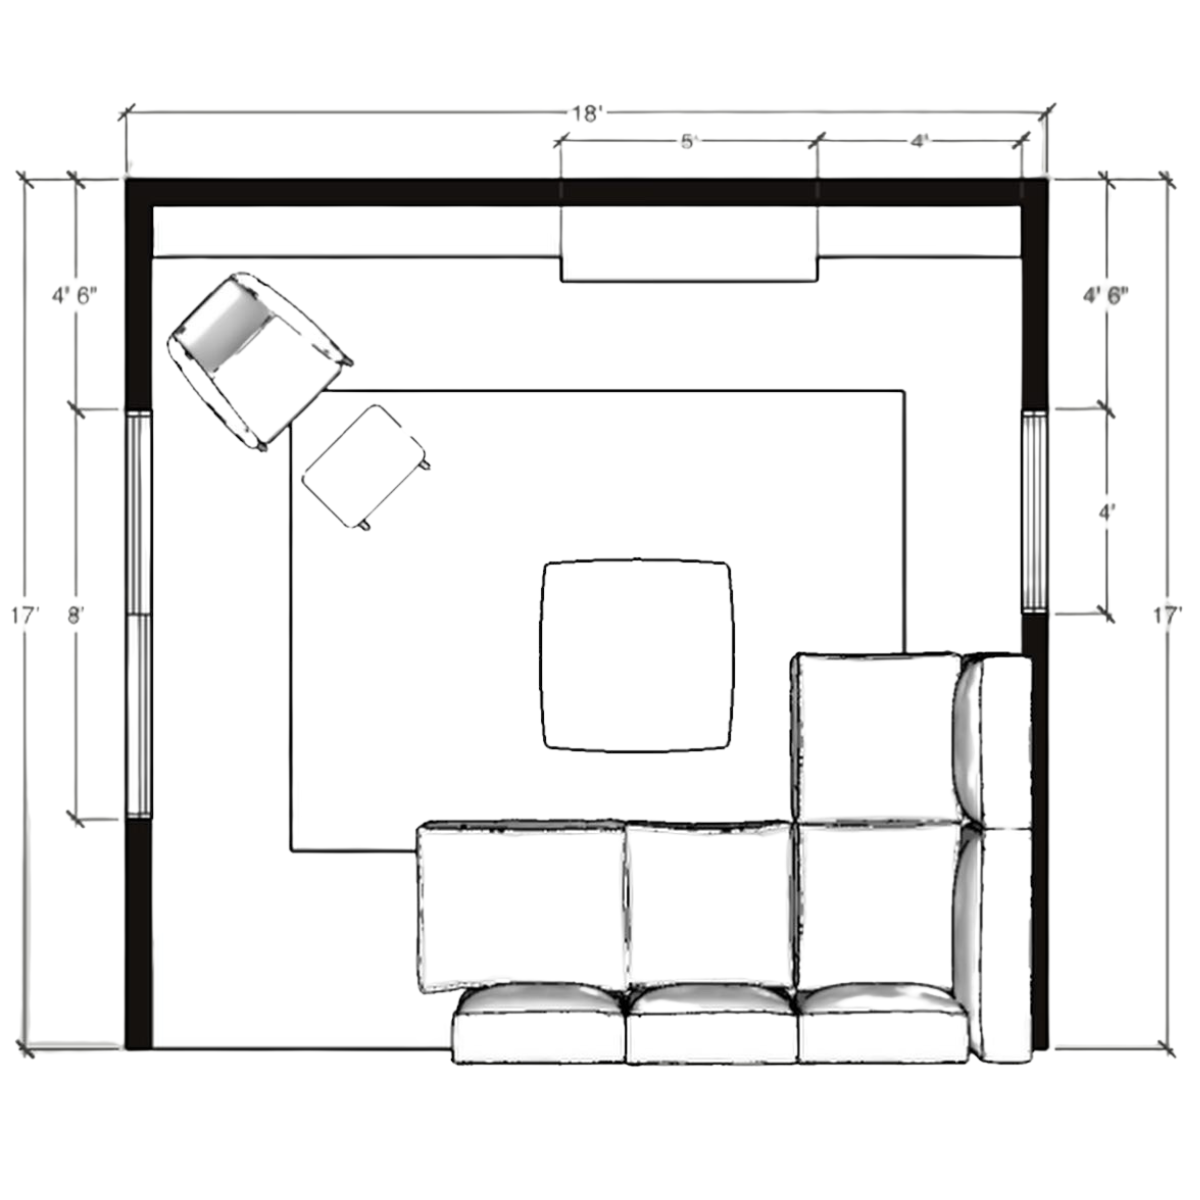 Floor plan created in SketchUp for a customer